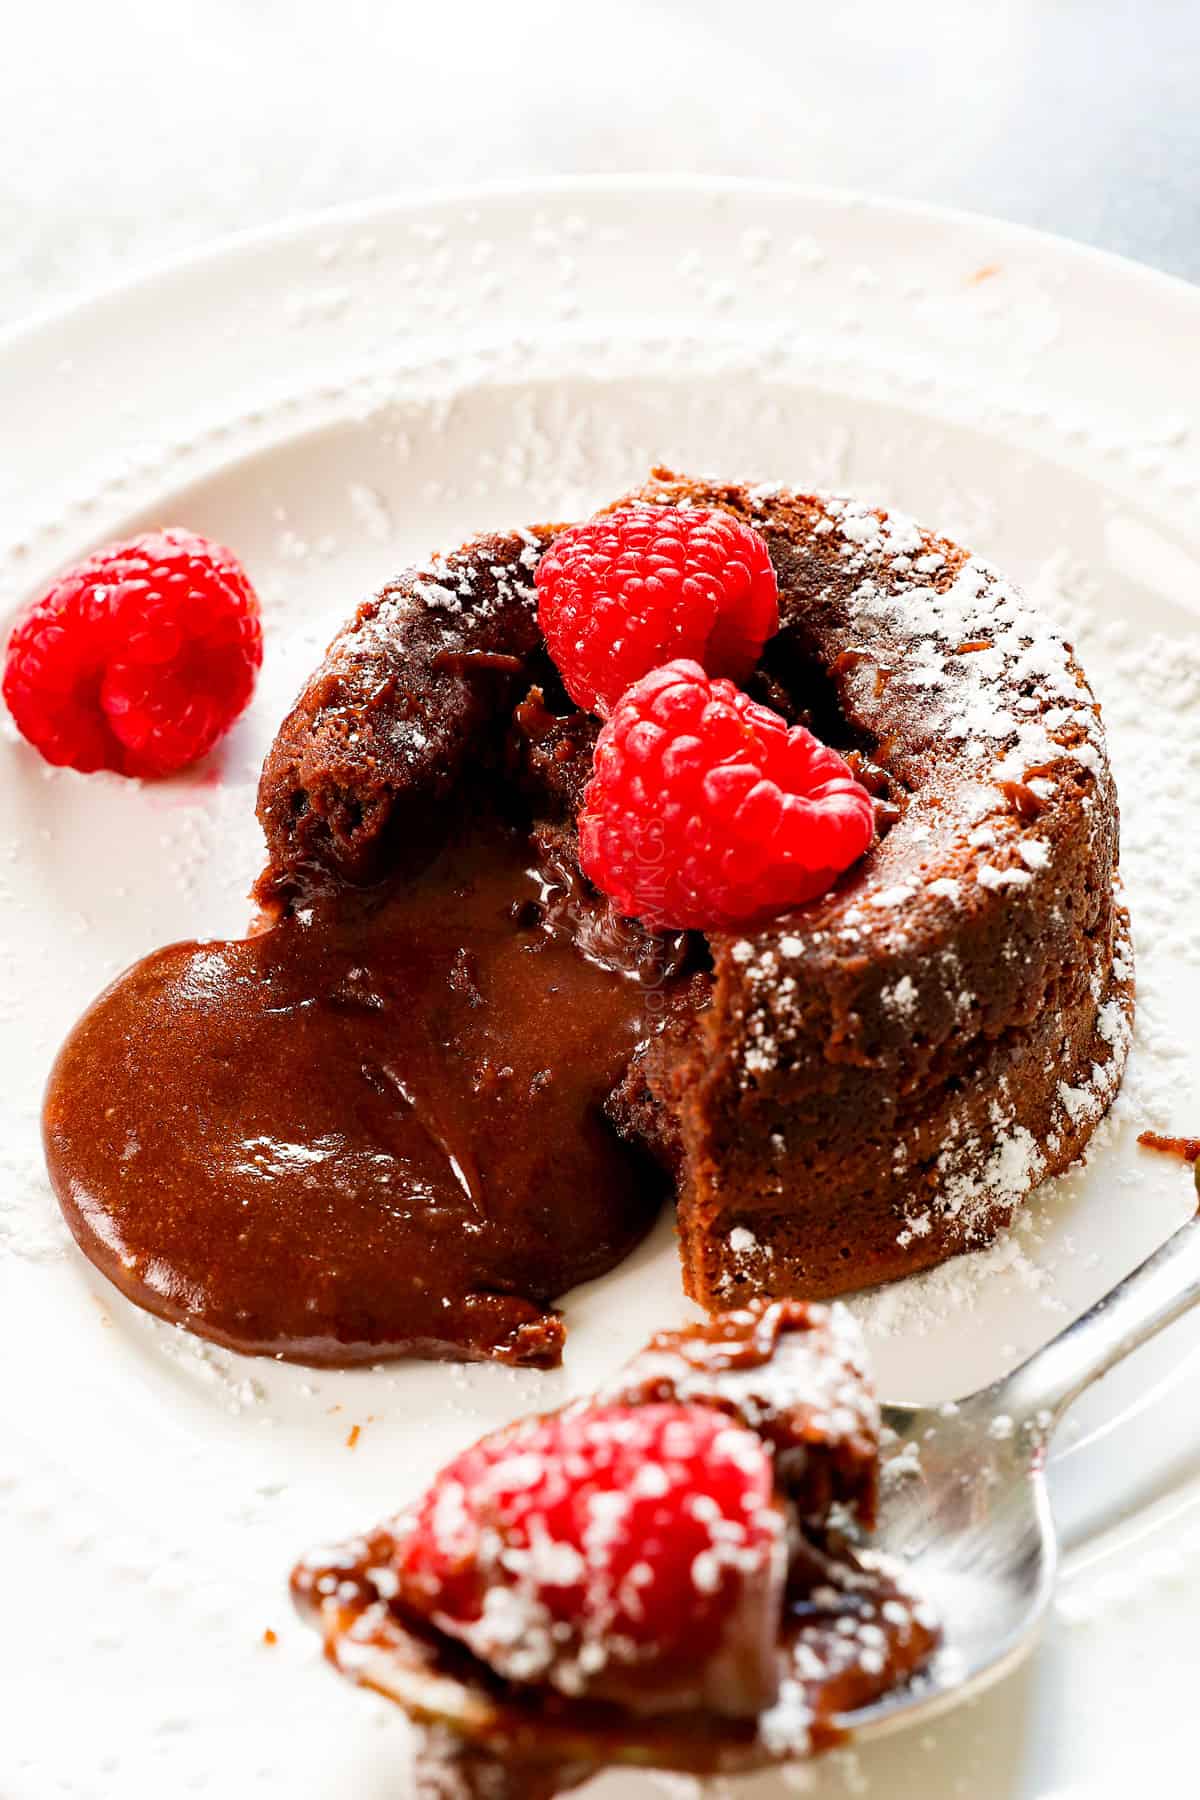 Molten Chocolate Cakes With Sugar-Coated Raspberries Recipe